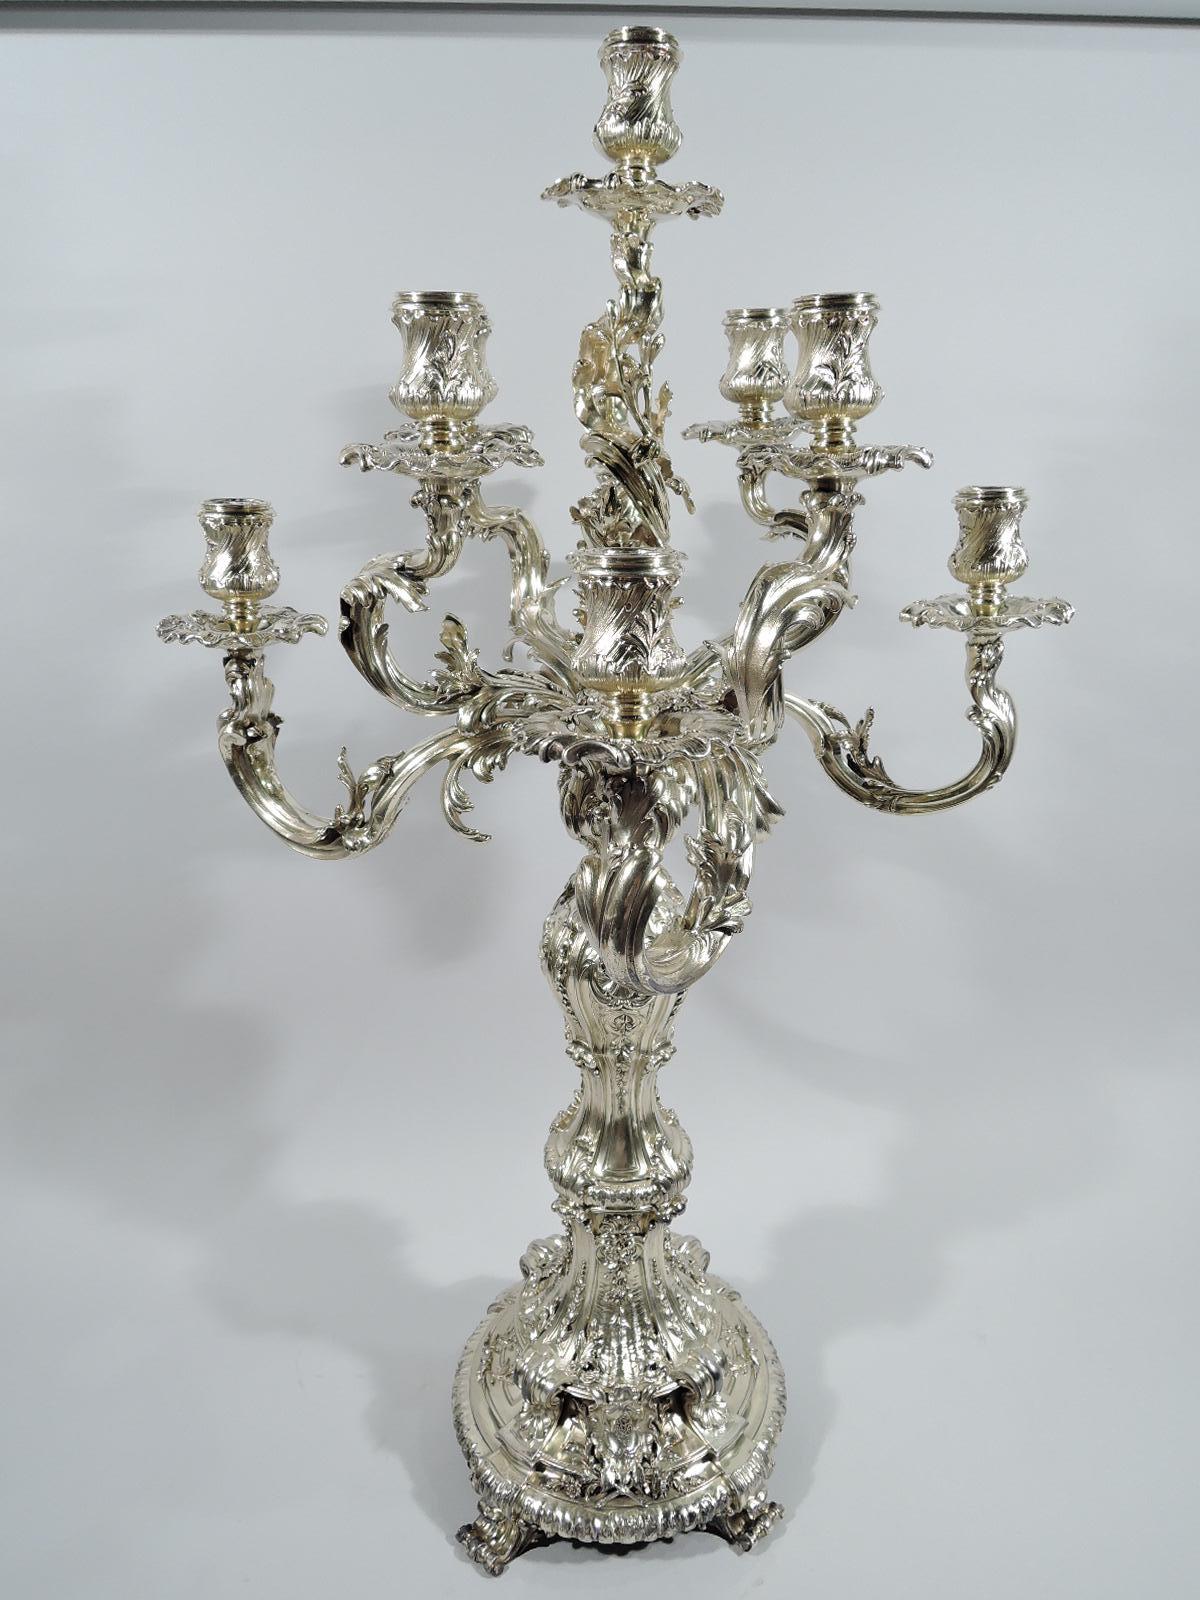 Pair of splendid and massive French Rococo 950 silver 9-light candelabra, circa 1880. Each: Baluster shaft on raised base with leaf-capped brackets and 4 scrolled feet. Low-relief shell, leaf, and scroll ornament. Central socket on open and twisting